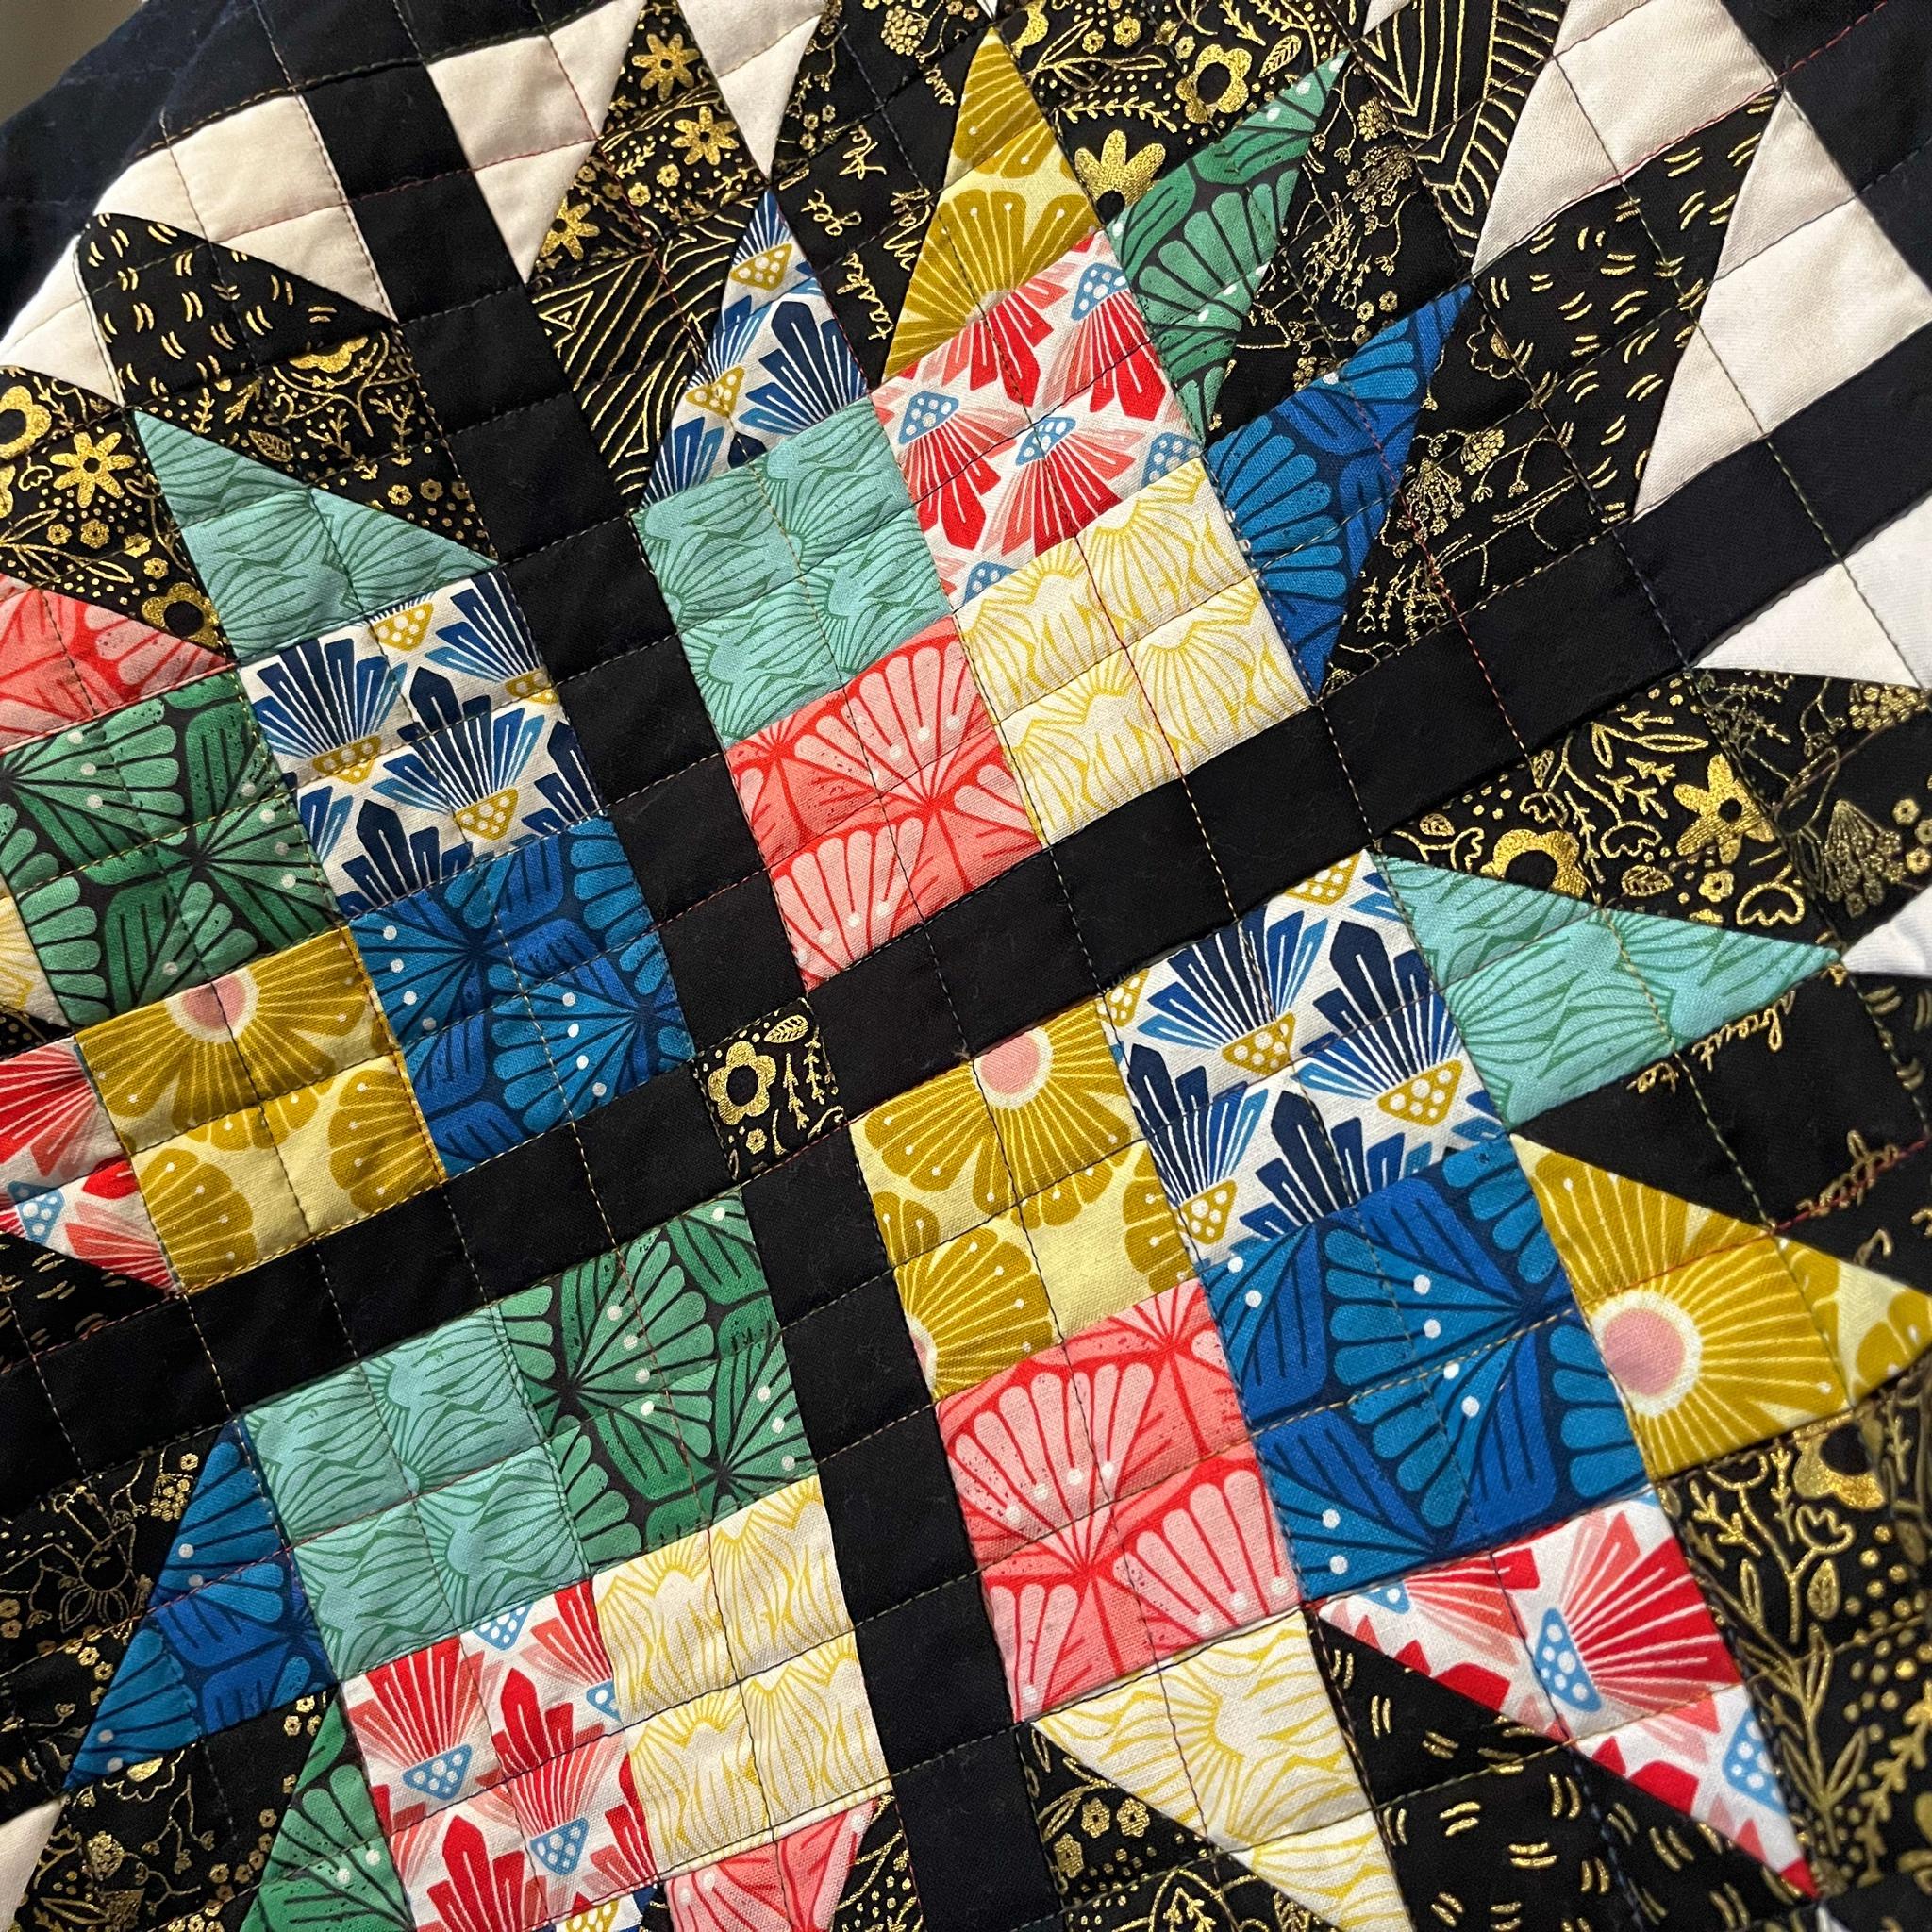 Quilt craft – most contemporary makes